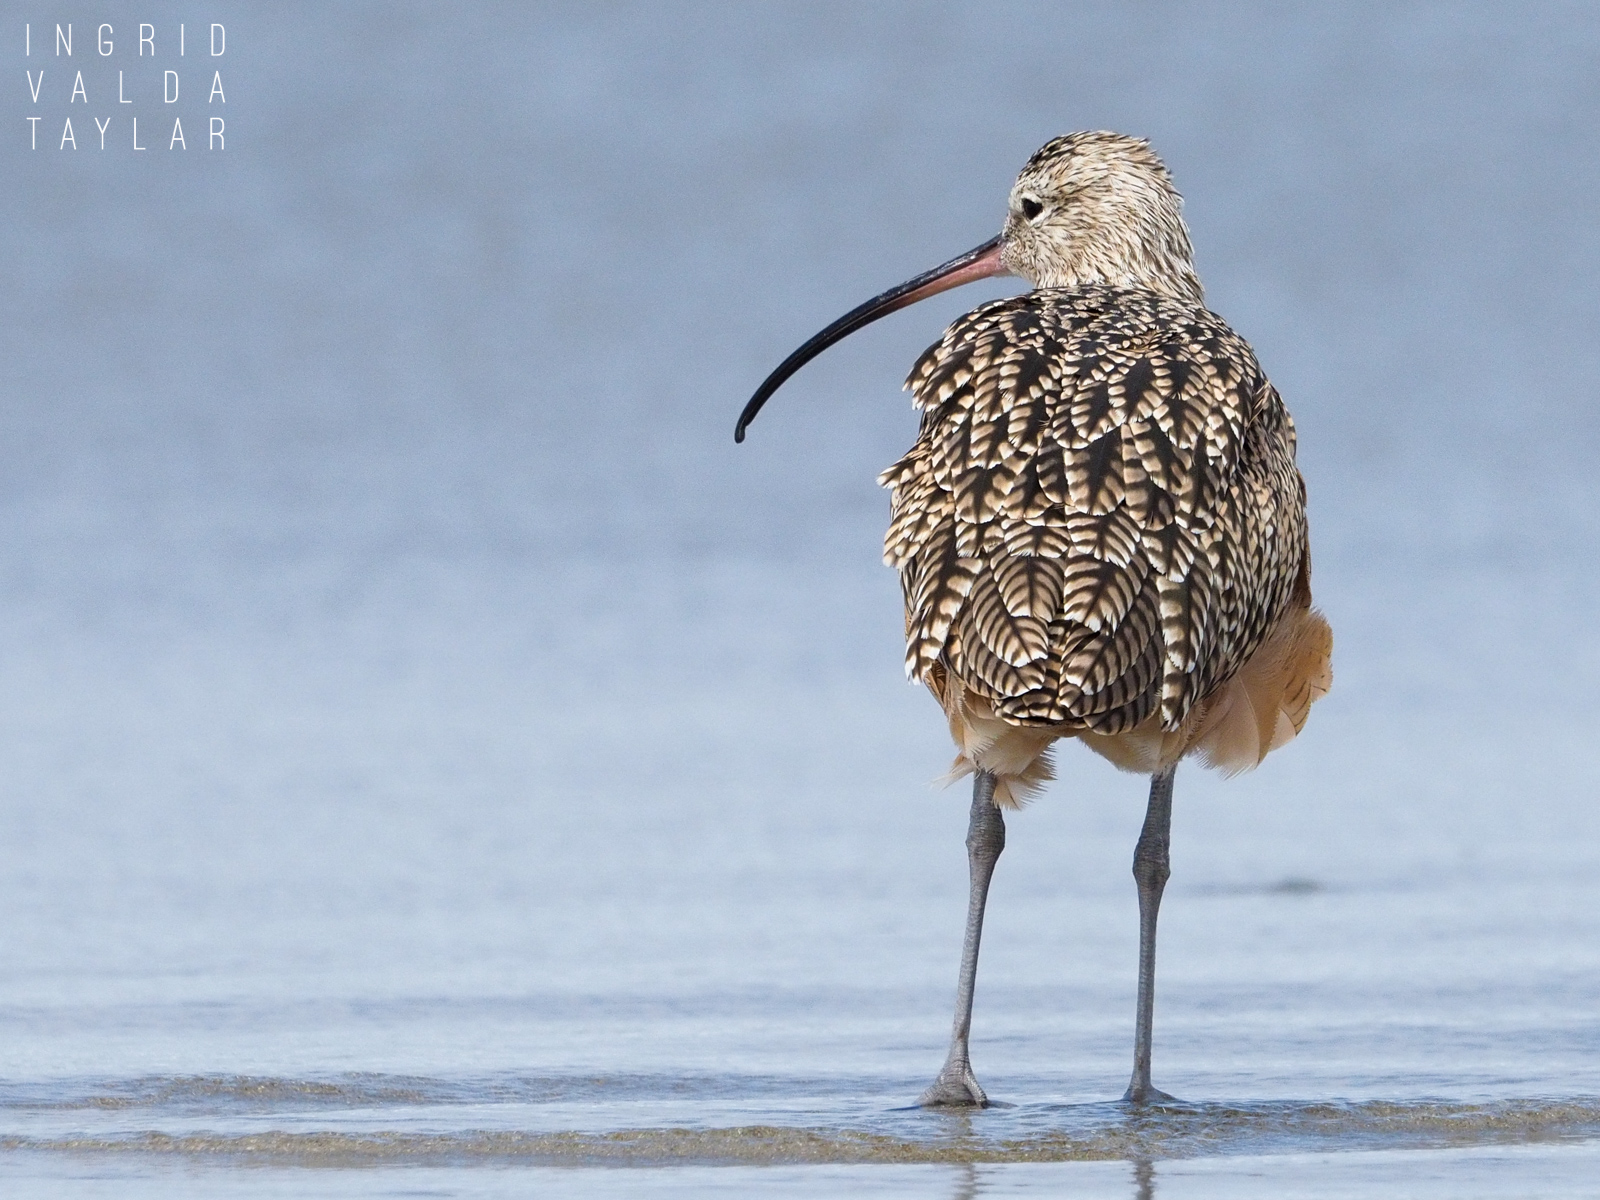 Long-Billed Curlew on Morro Strand-2